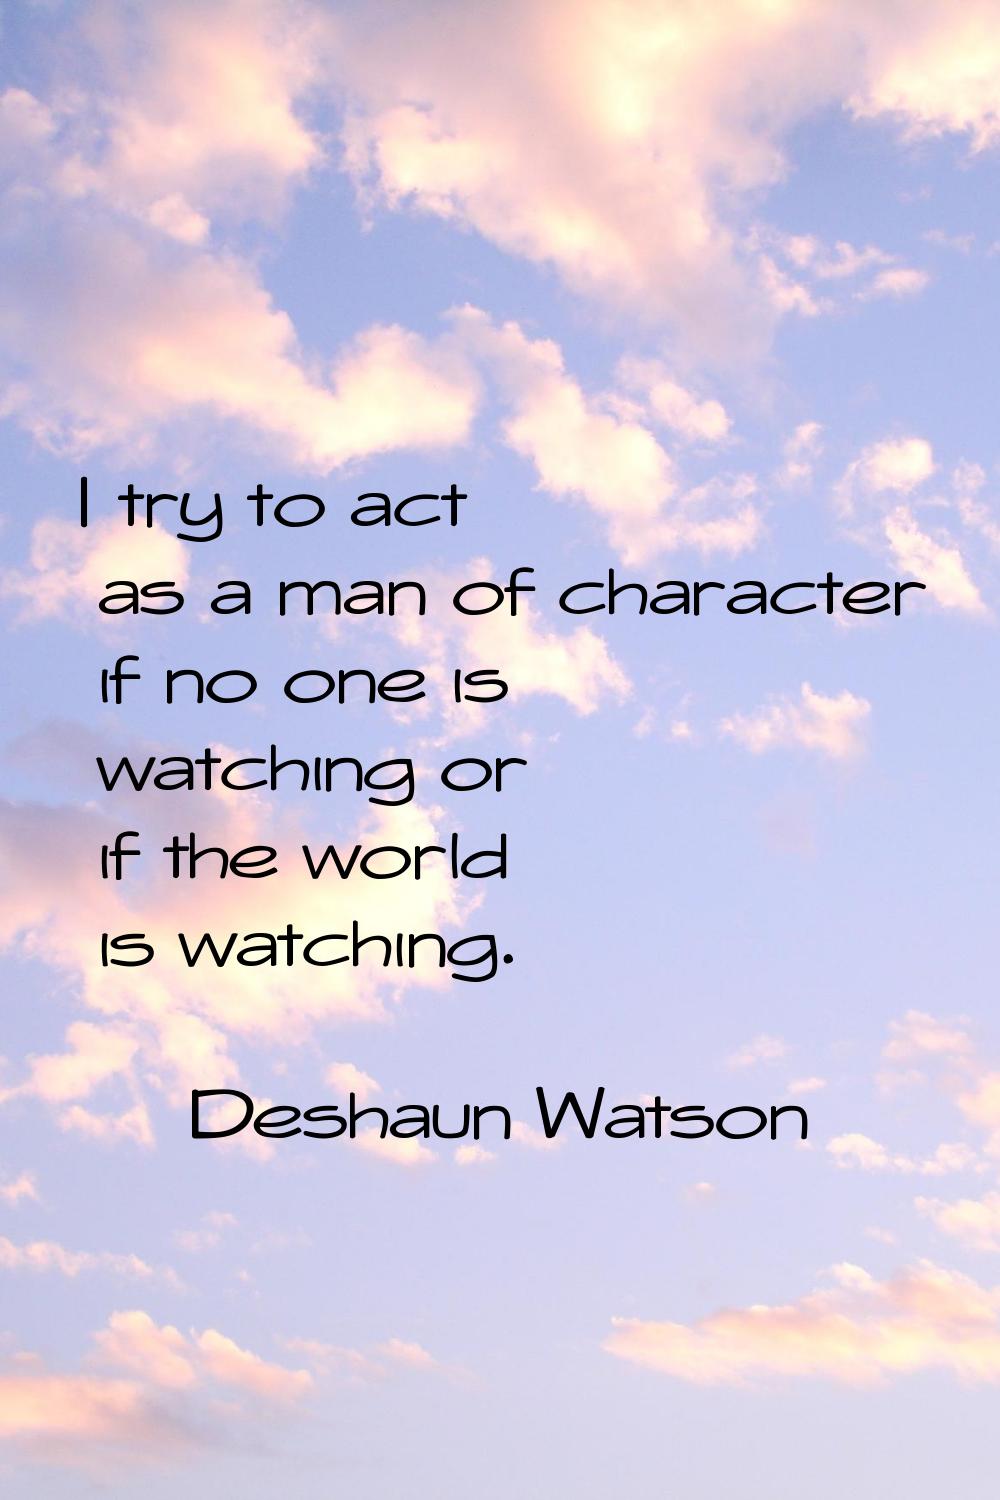 I try to act as a man of character if no one is watching or if the world is watching.